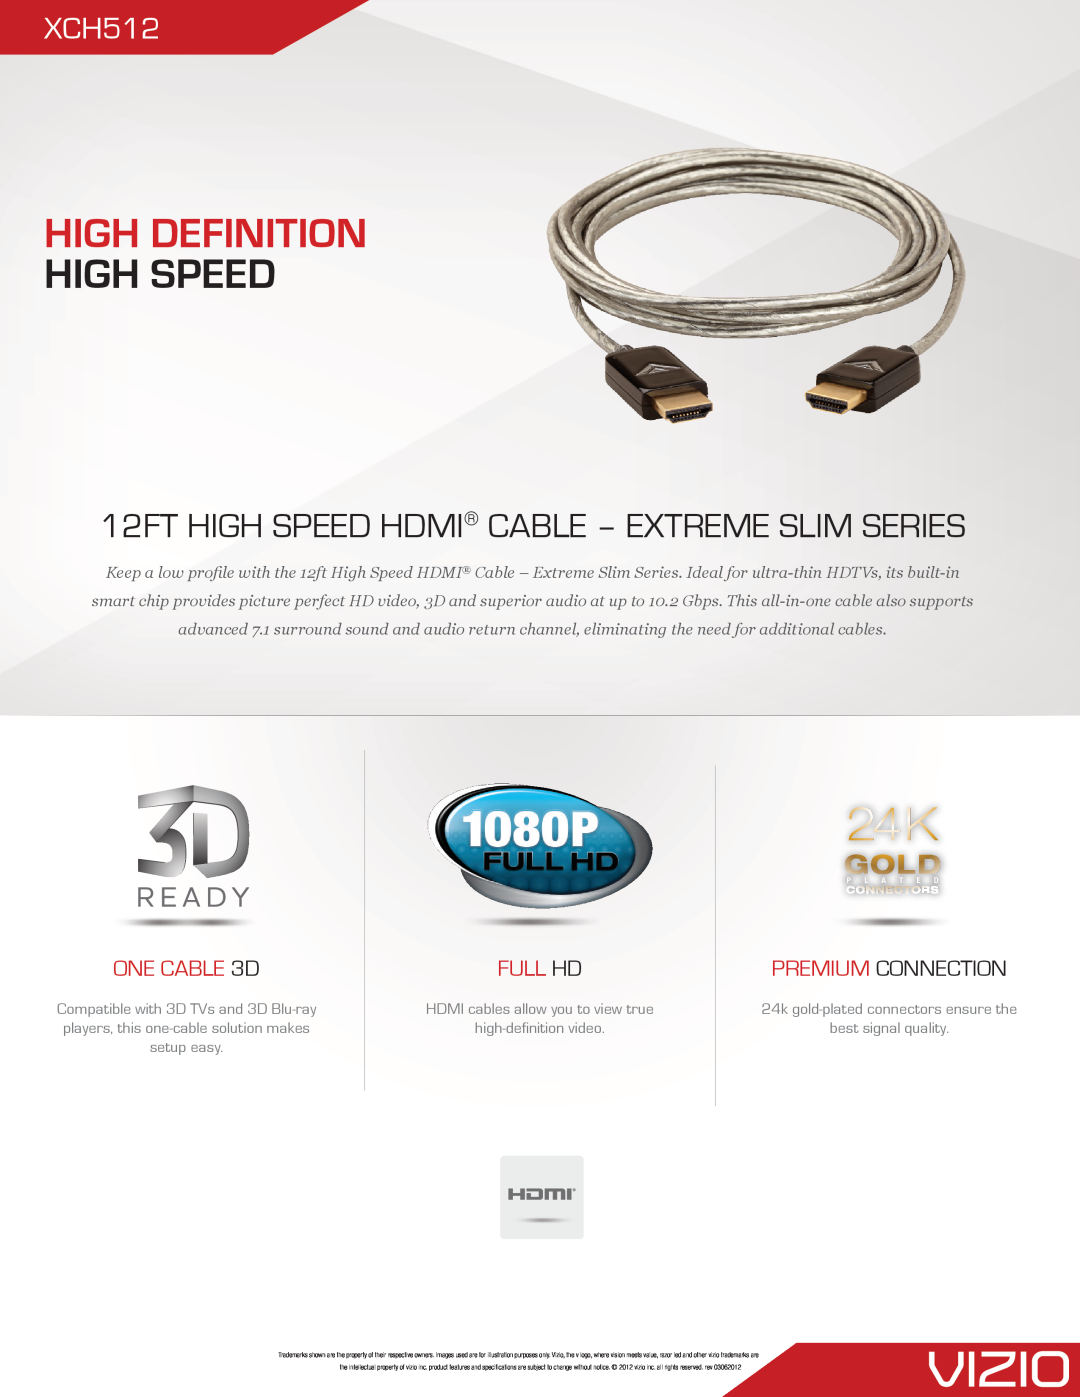 Vizio XCH512 specifications High Definition, High Speed, 12FT HIGH SPEED HDMI CABLE - EXTREME SLIM SERIES, ONE CABLE 3D 